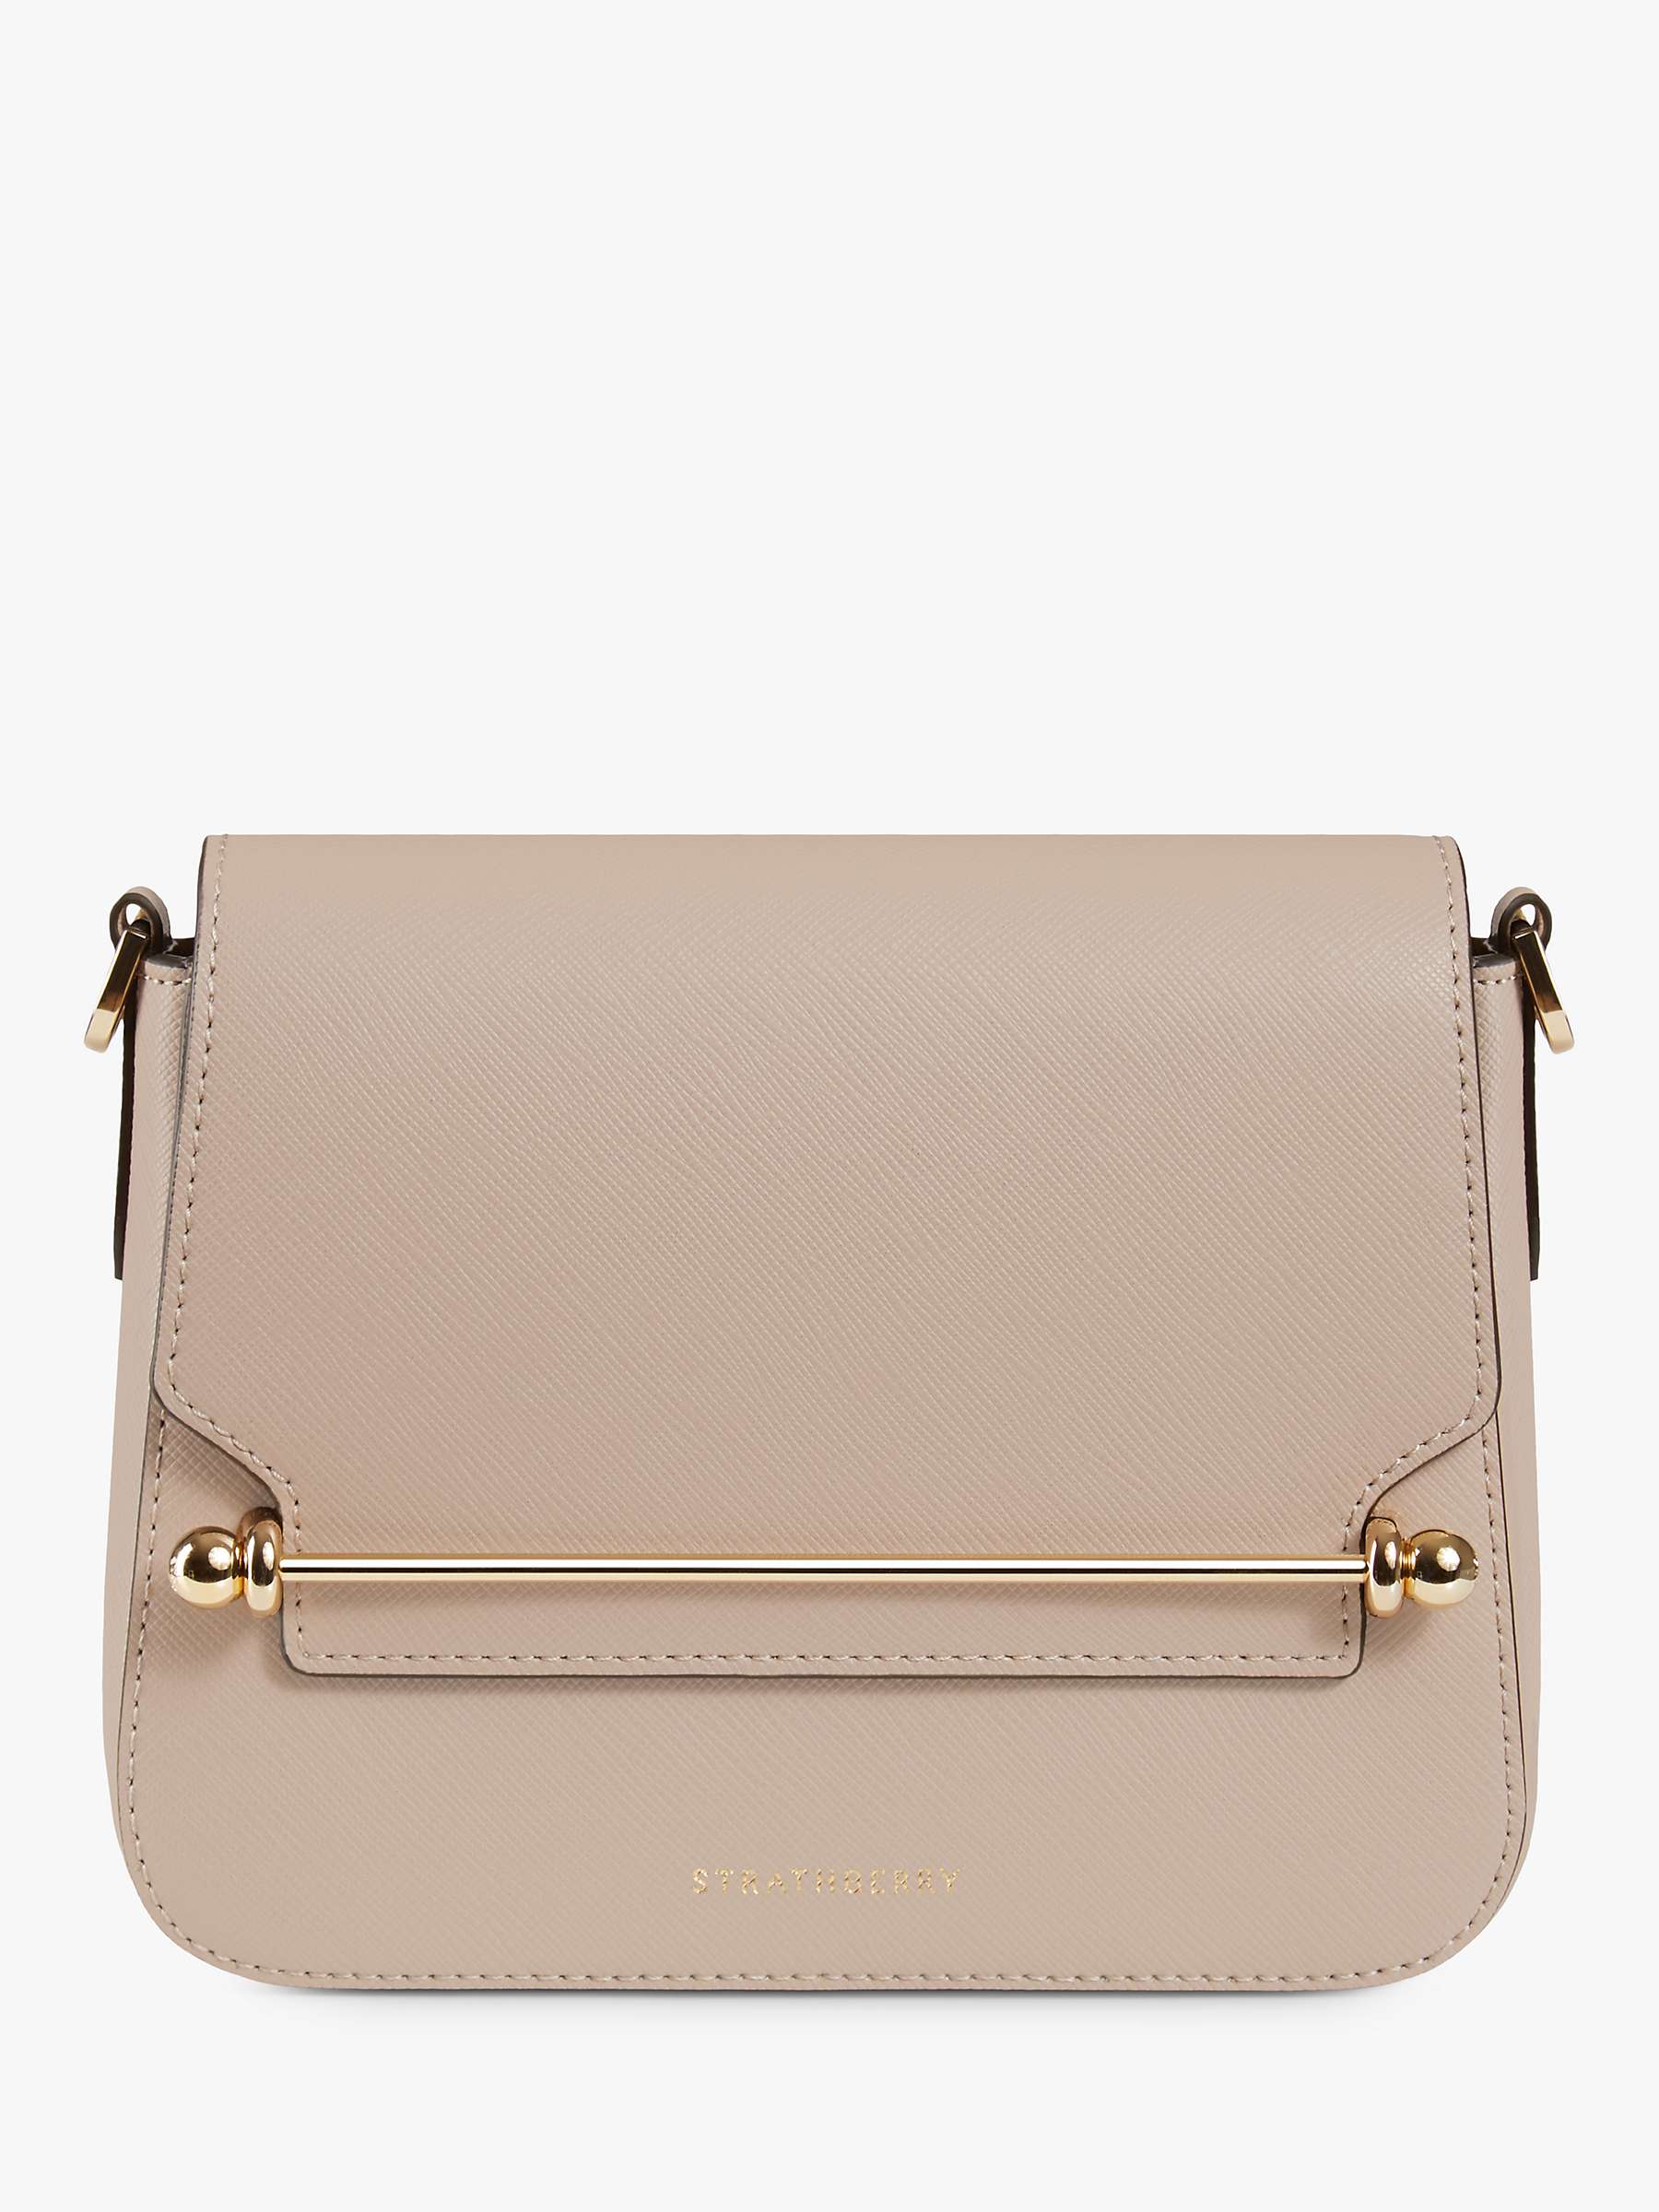 Strathberry Ace Mini Leather Cross Body Bag, Cappuccino at John Lewis ...